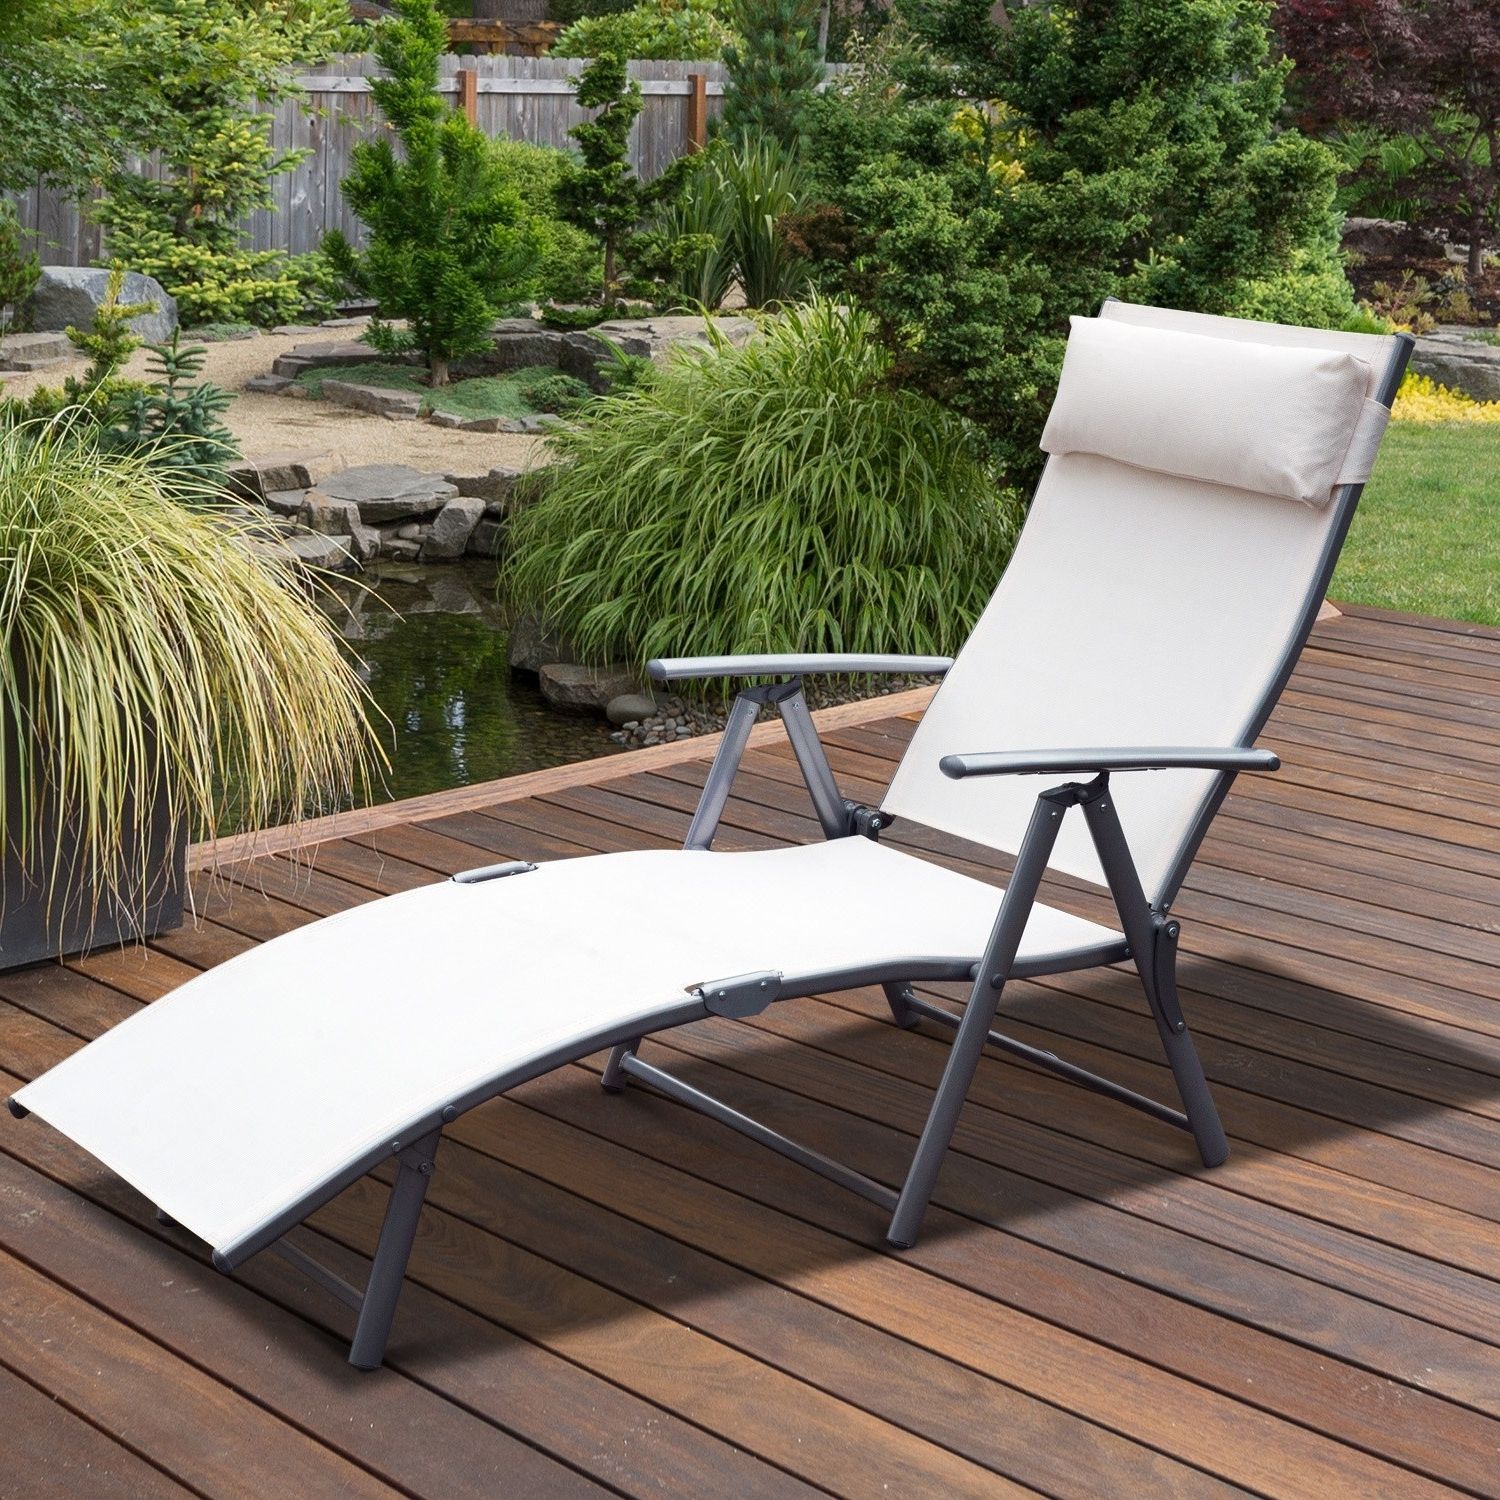 Trendy Heavy Duty Outdoor Chaise Lounge Chairs Inside Lounge Chair : Big Guys Outdoor Chairs For Large Person Outdoor (View 14 of 15)